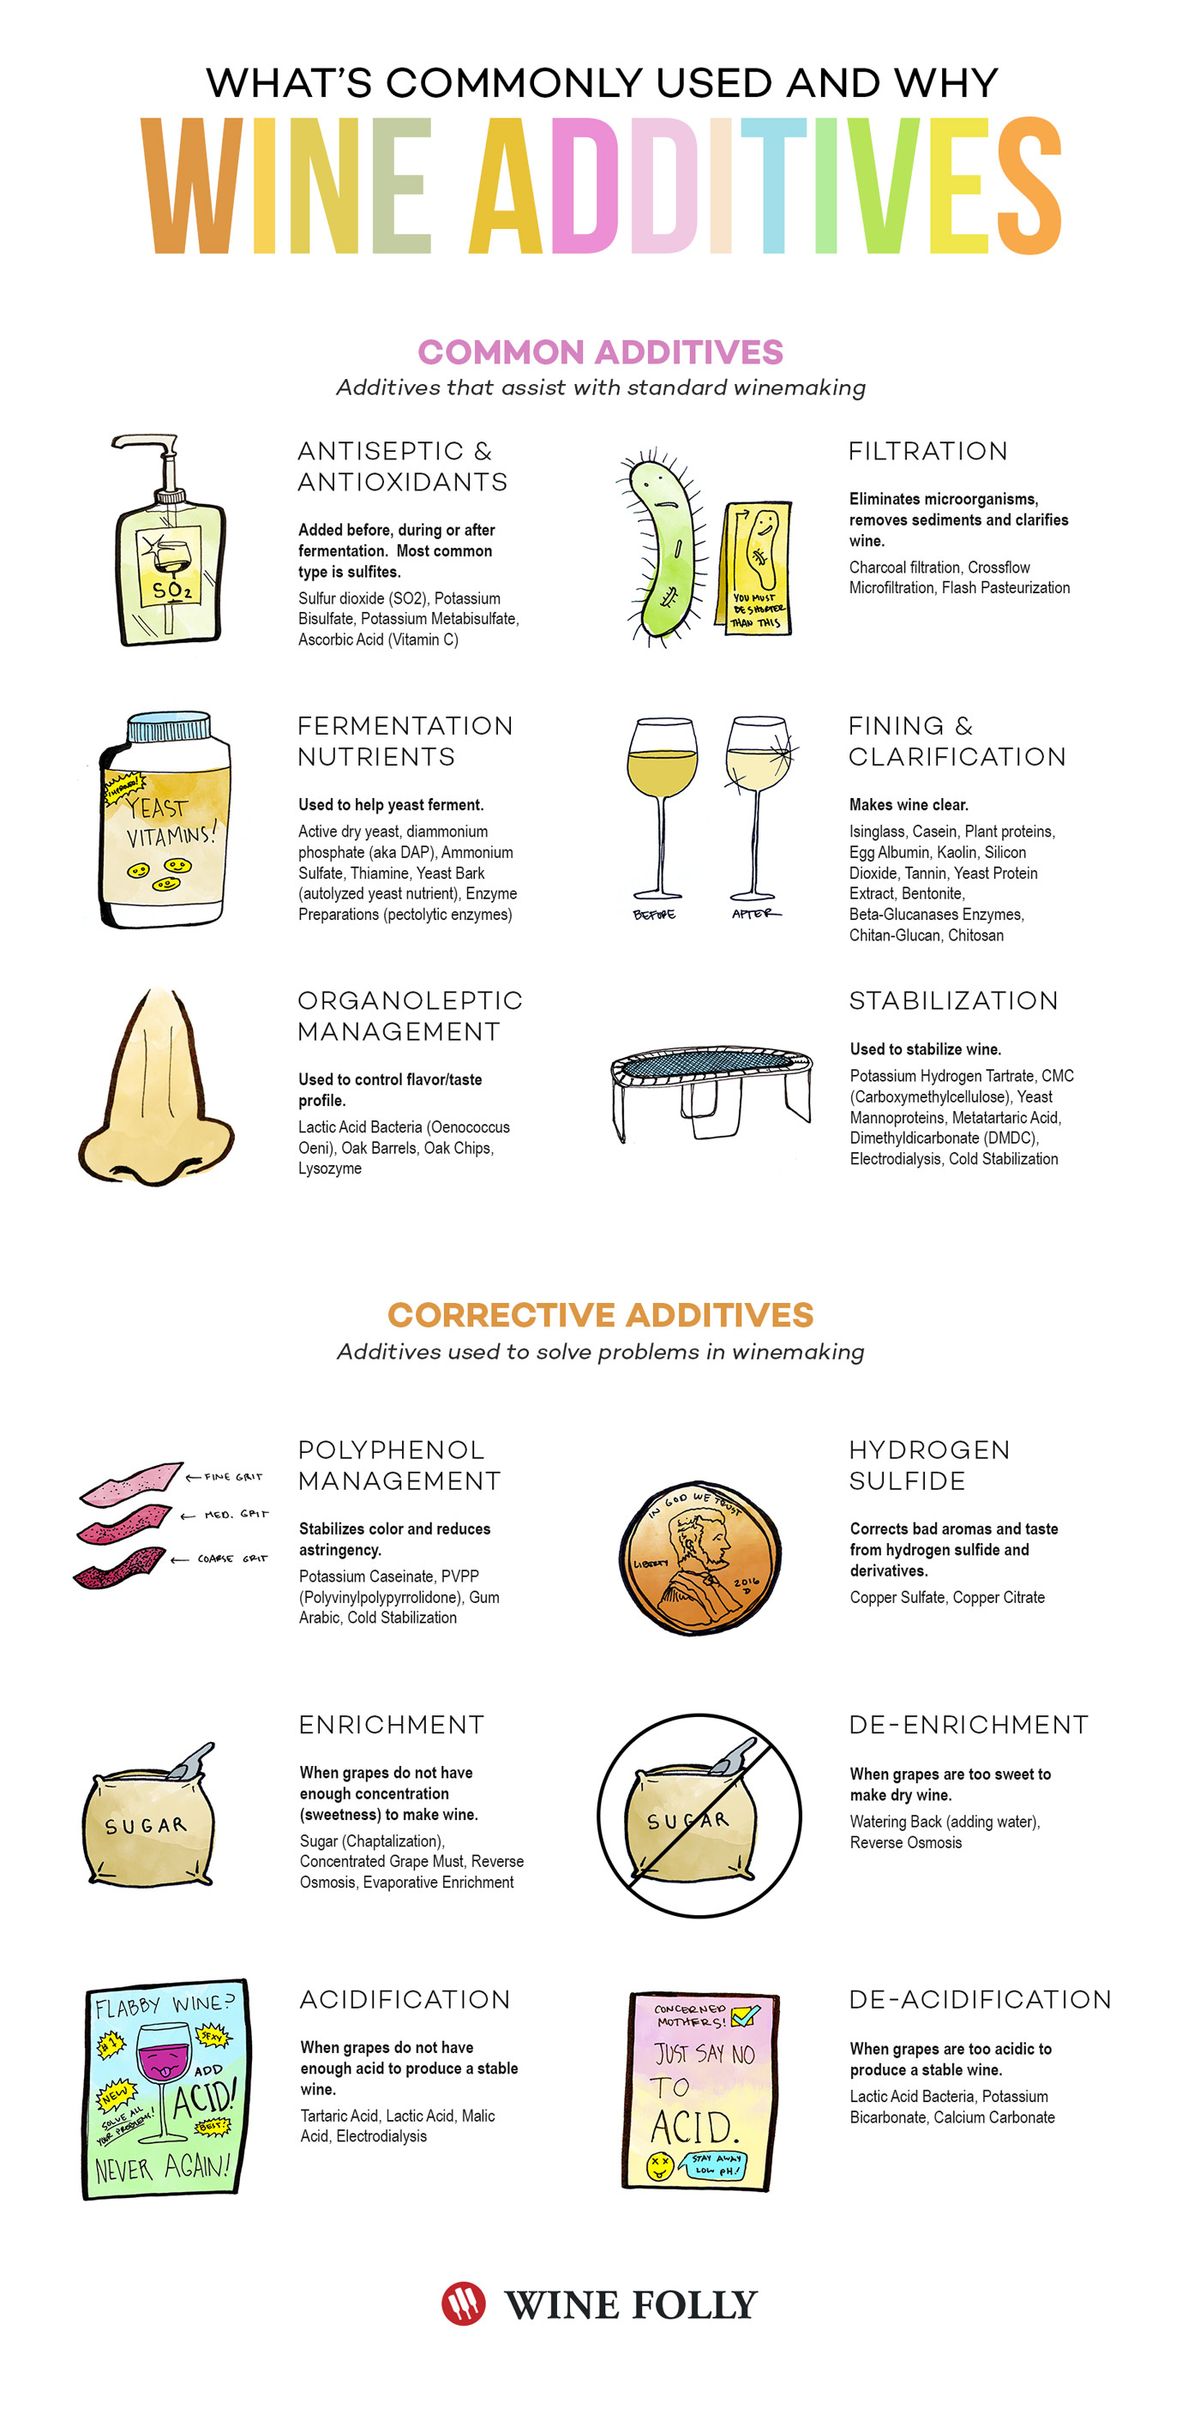 wine-additives-infographic-wine-folly